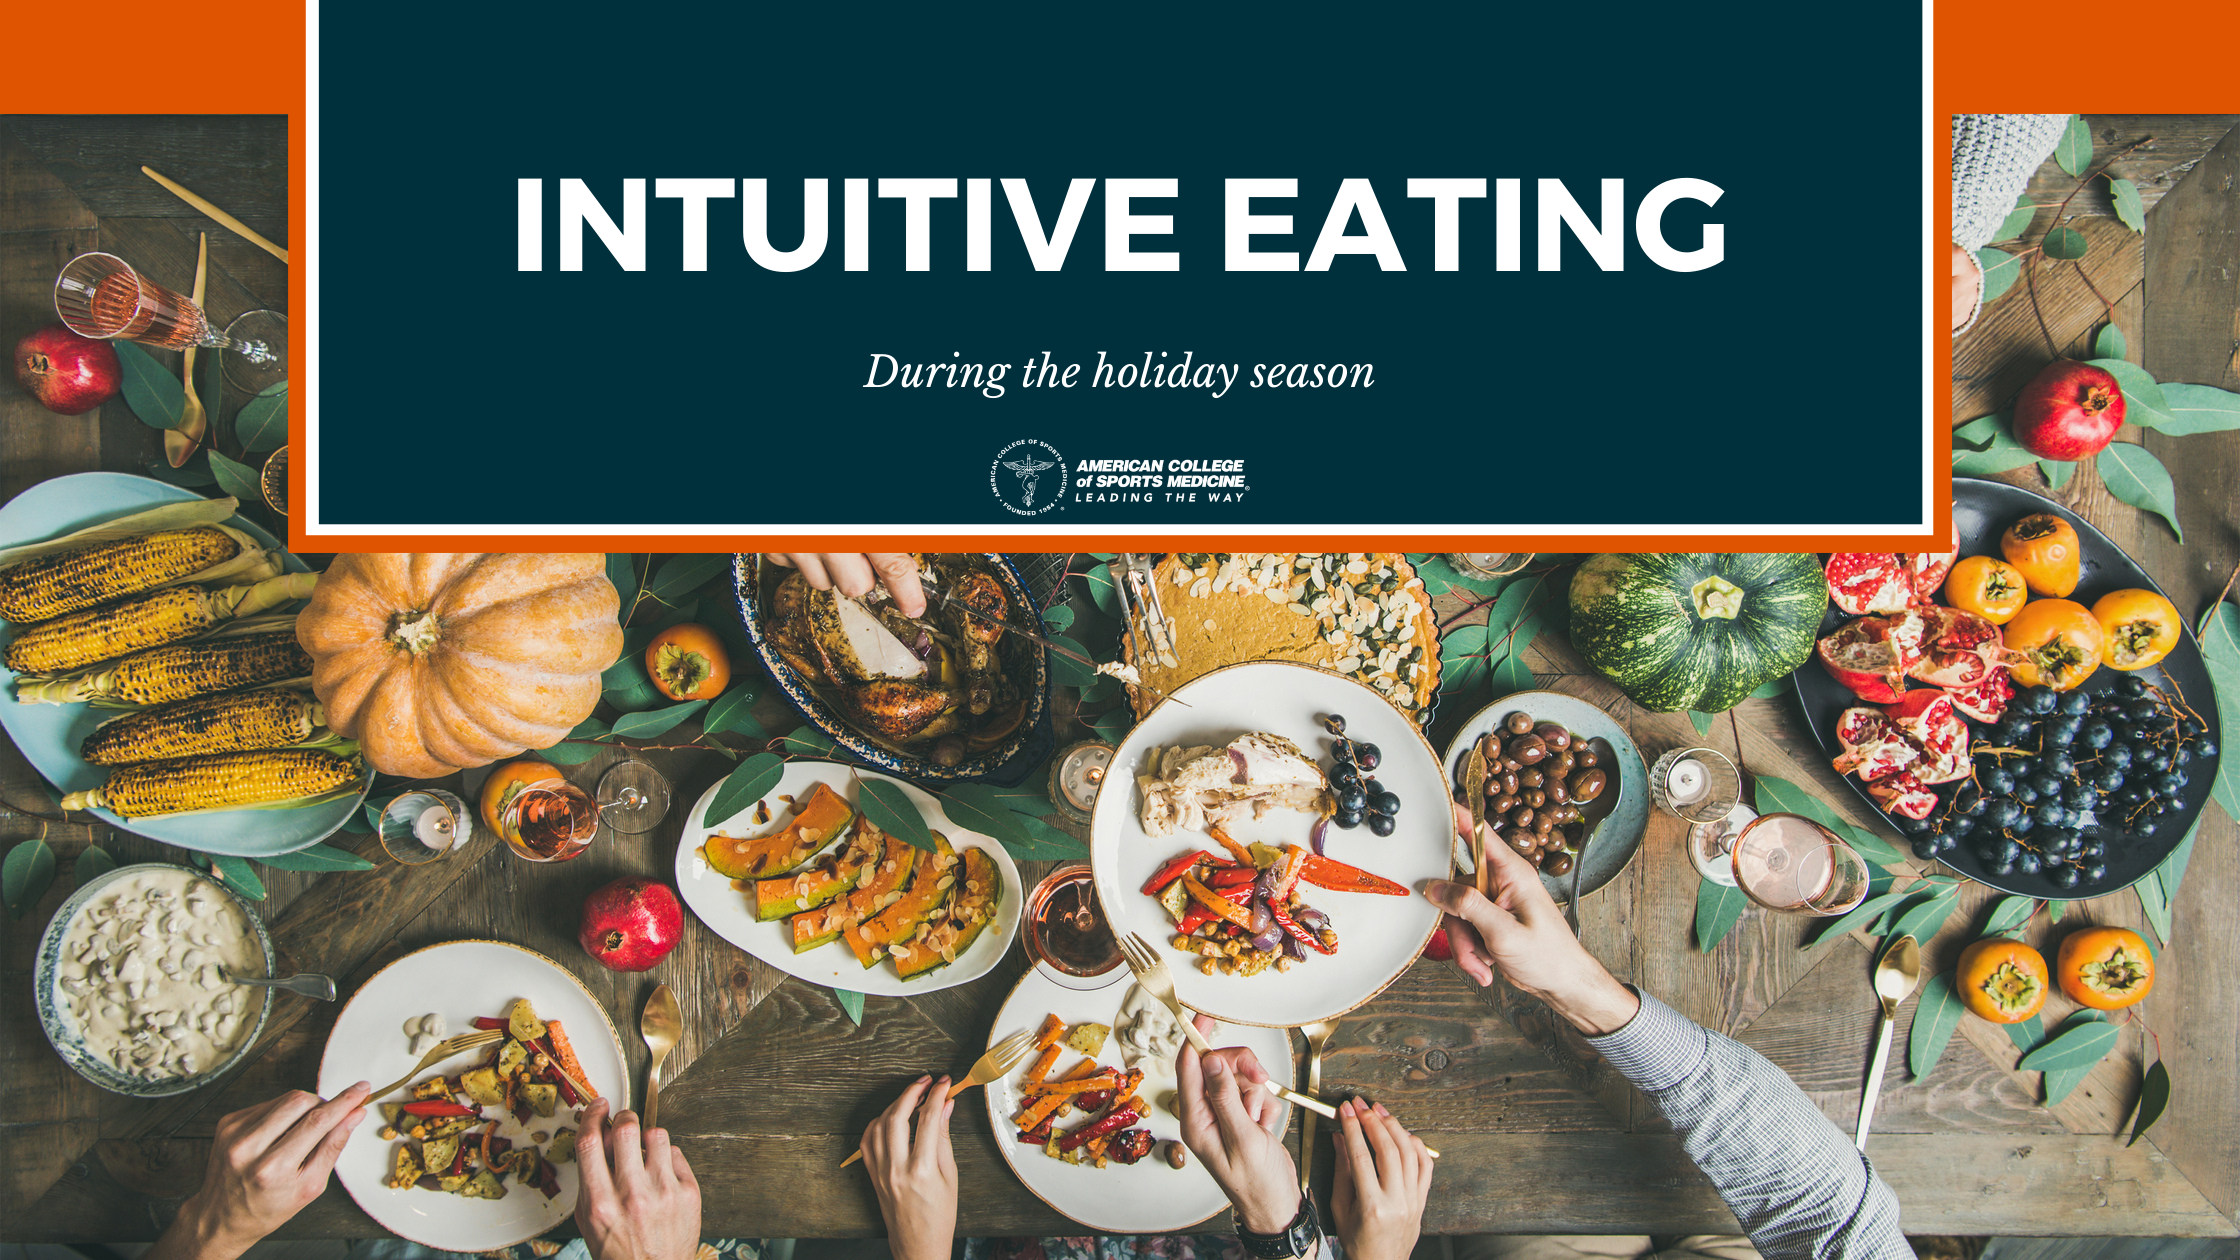 Intuitive eating during the holidays